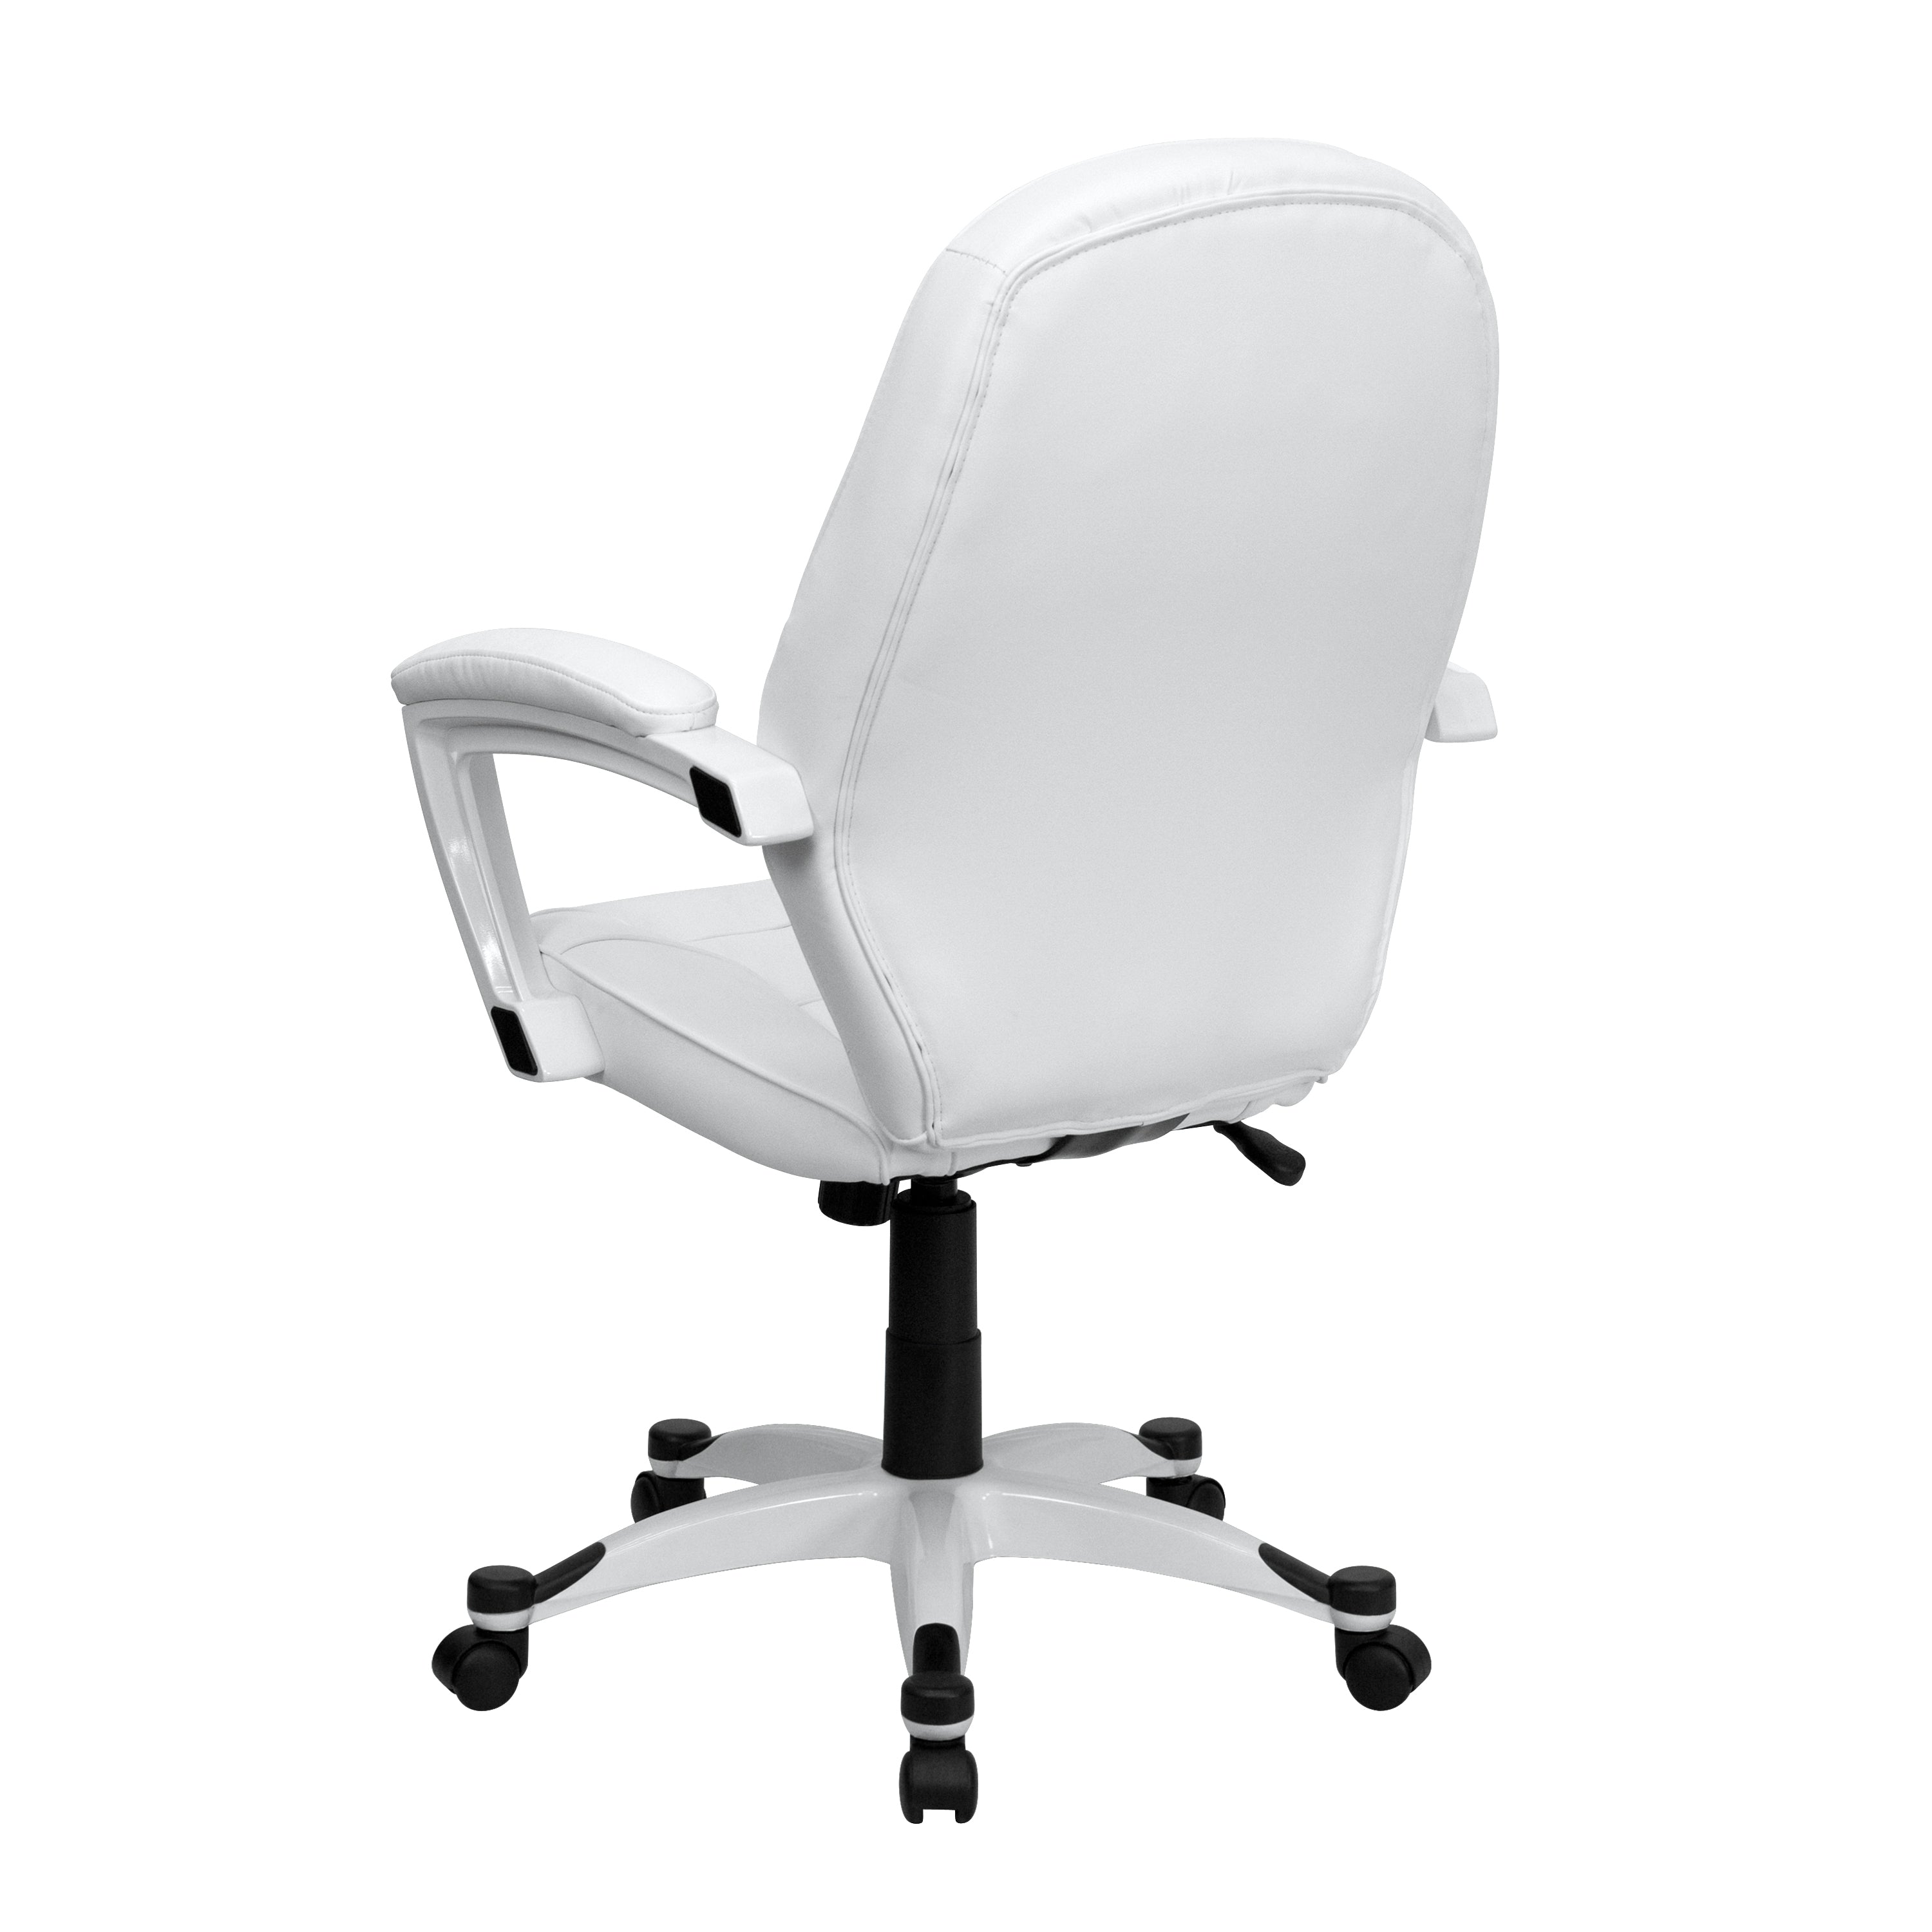 Mid-Back LeatherSoft Tapered Back Executive Swivel Office Chair with Base and Arms-Office Chair-Flash Furniture-Wall2Wall Furnishings